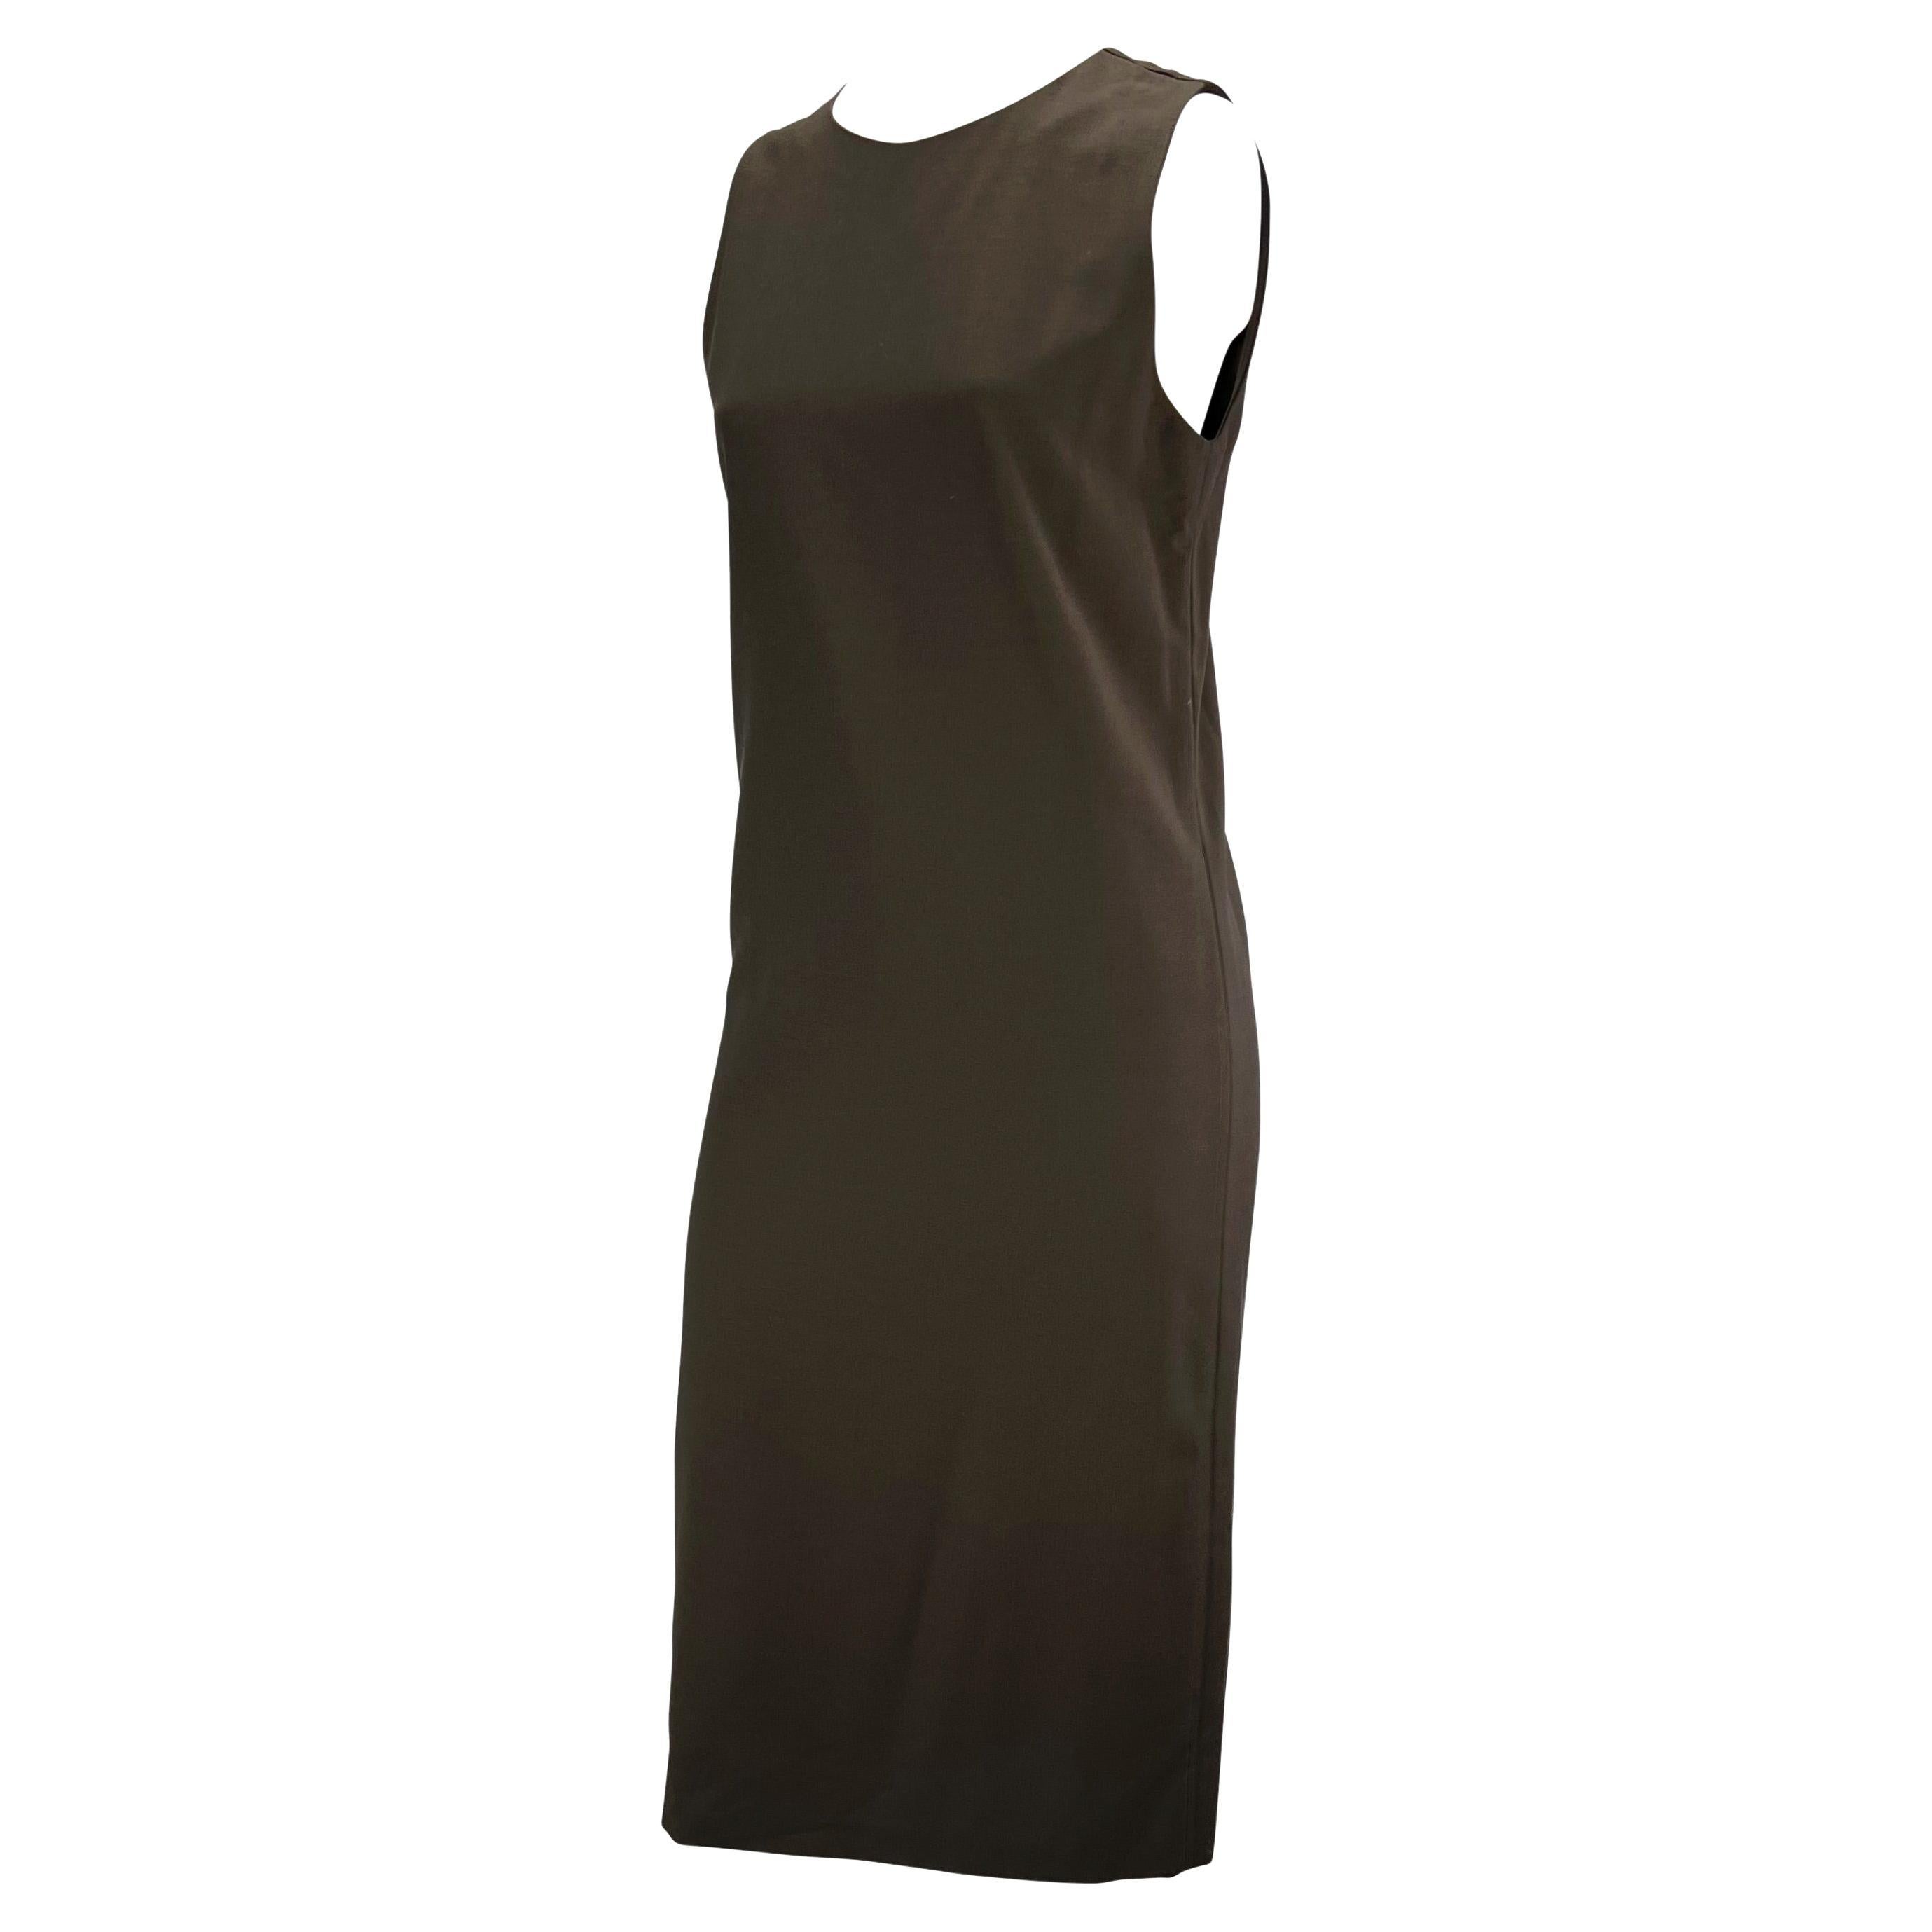 Presenting a brown sleeveless Gucci dress, designed by Tom Ford. From the Spring/Summer 1997 collection, this simple column shift dress is effortlessly chic. Featuring a round neckline, this dress is made complete with a small keyhole detail at the